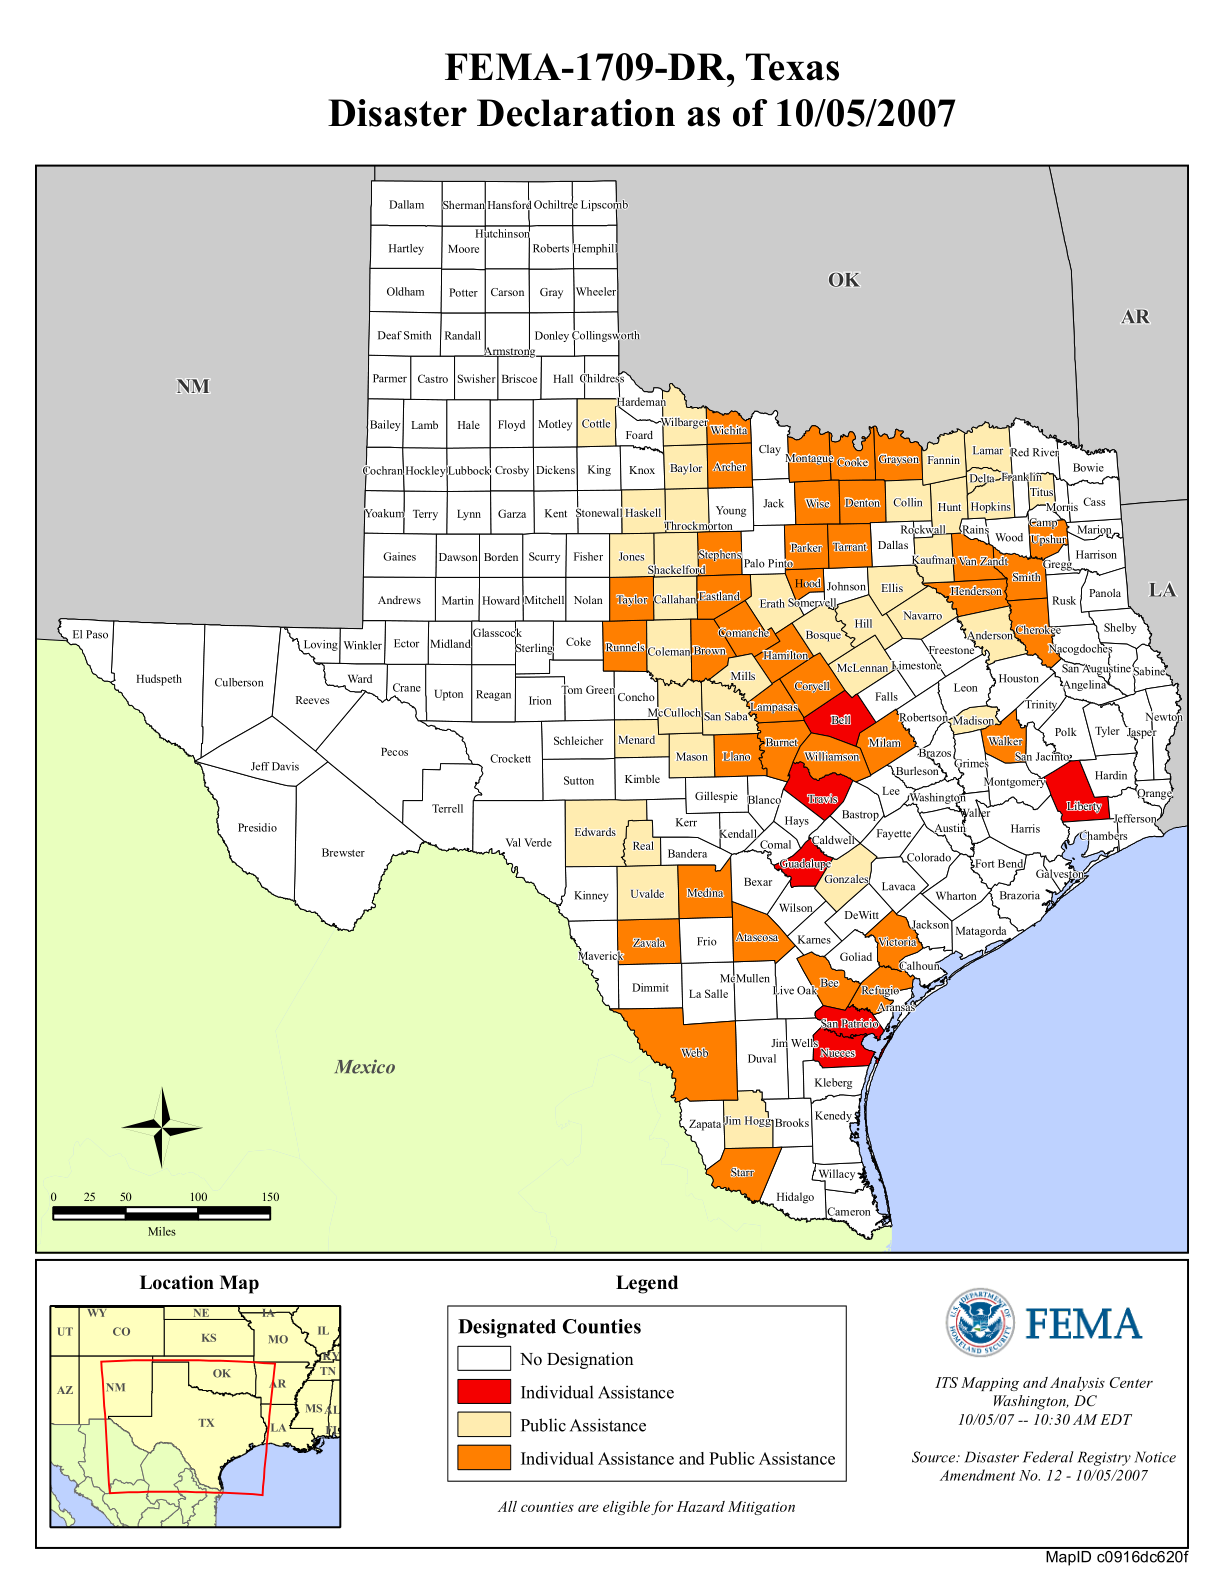 Tornadoes In Texas Map